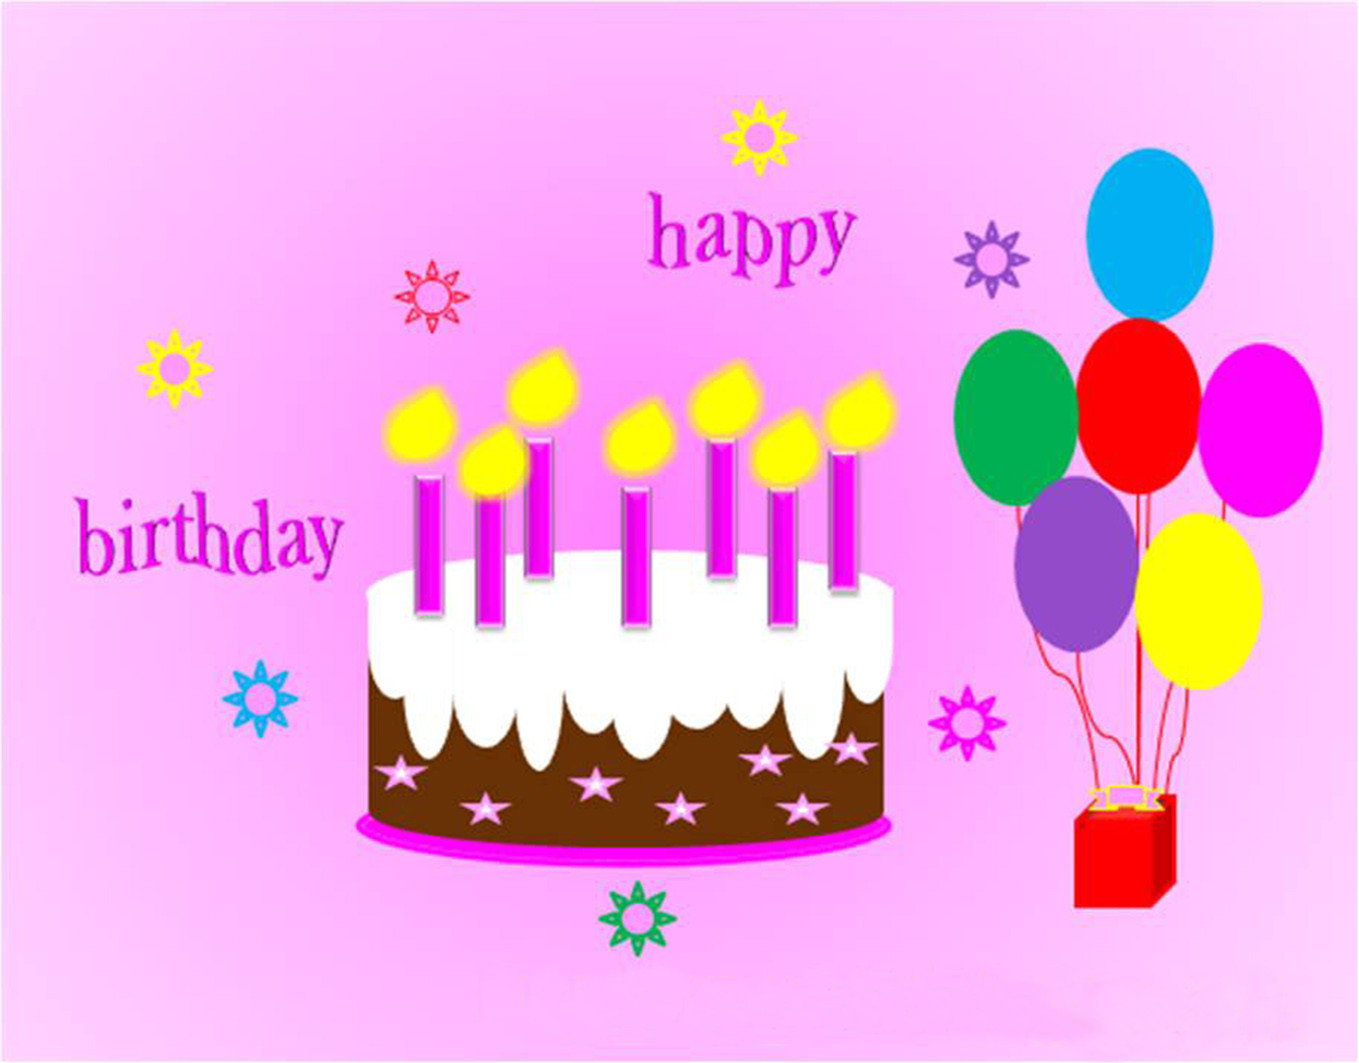 Free Download Birthday Card
 35 Happy Birthday Cards Free To Download – The WoW Style